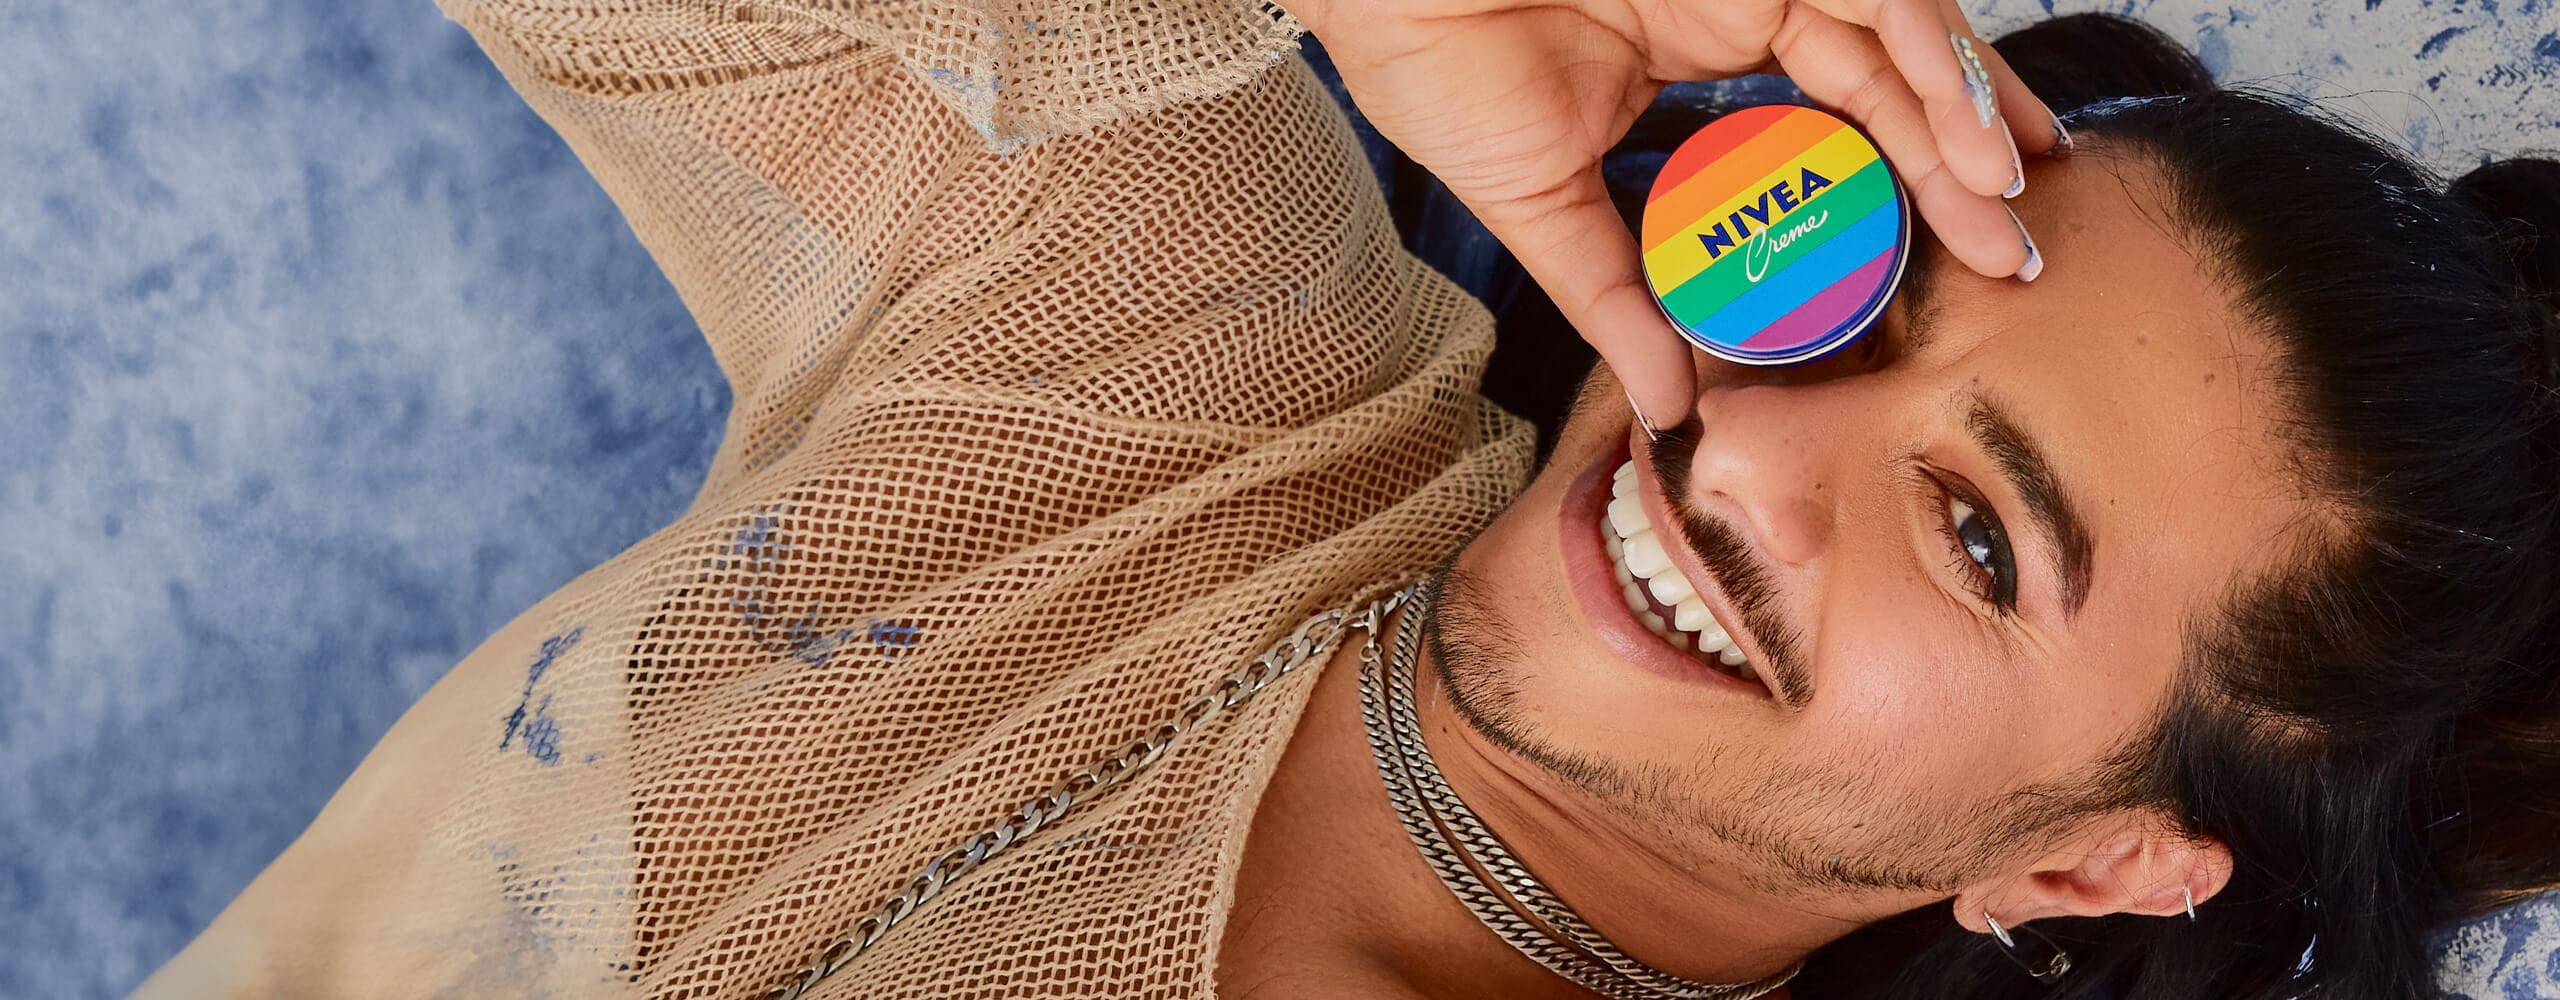 A view of a person laying down and smiling, while holding a rainbow-coloured Nivea Crème Pride edition product against their face.